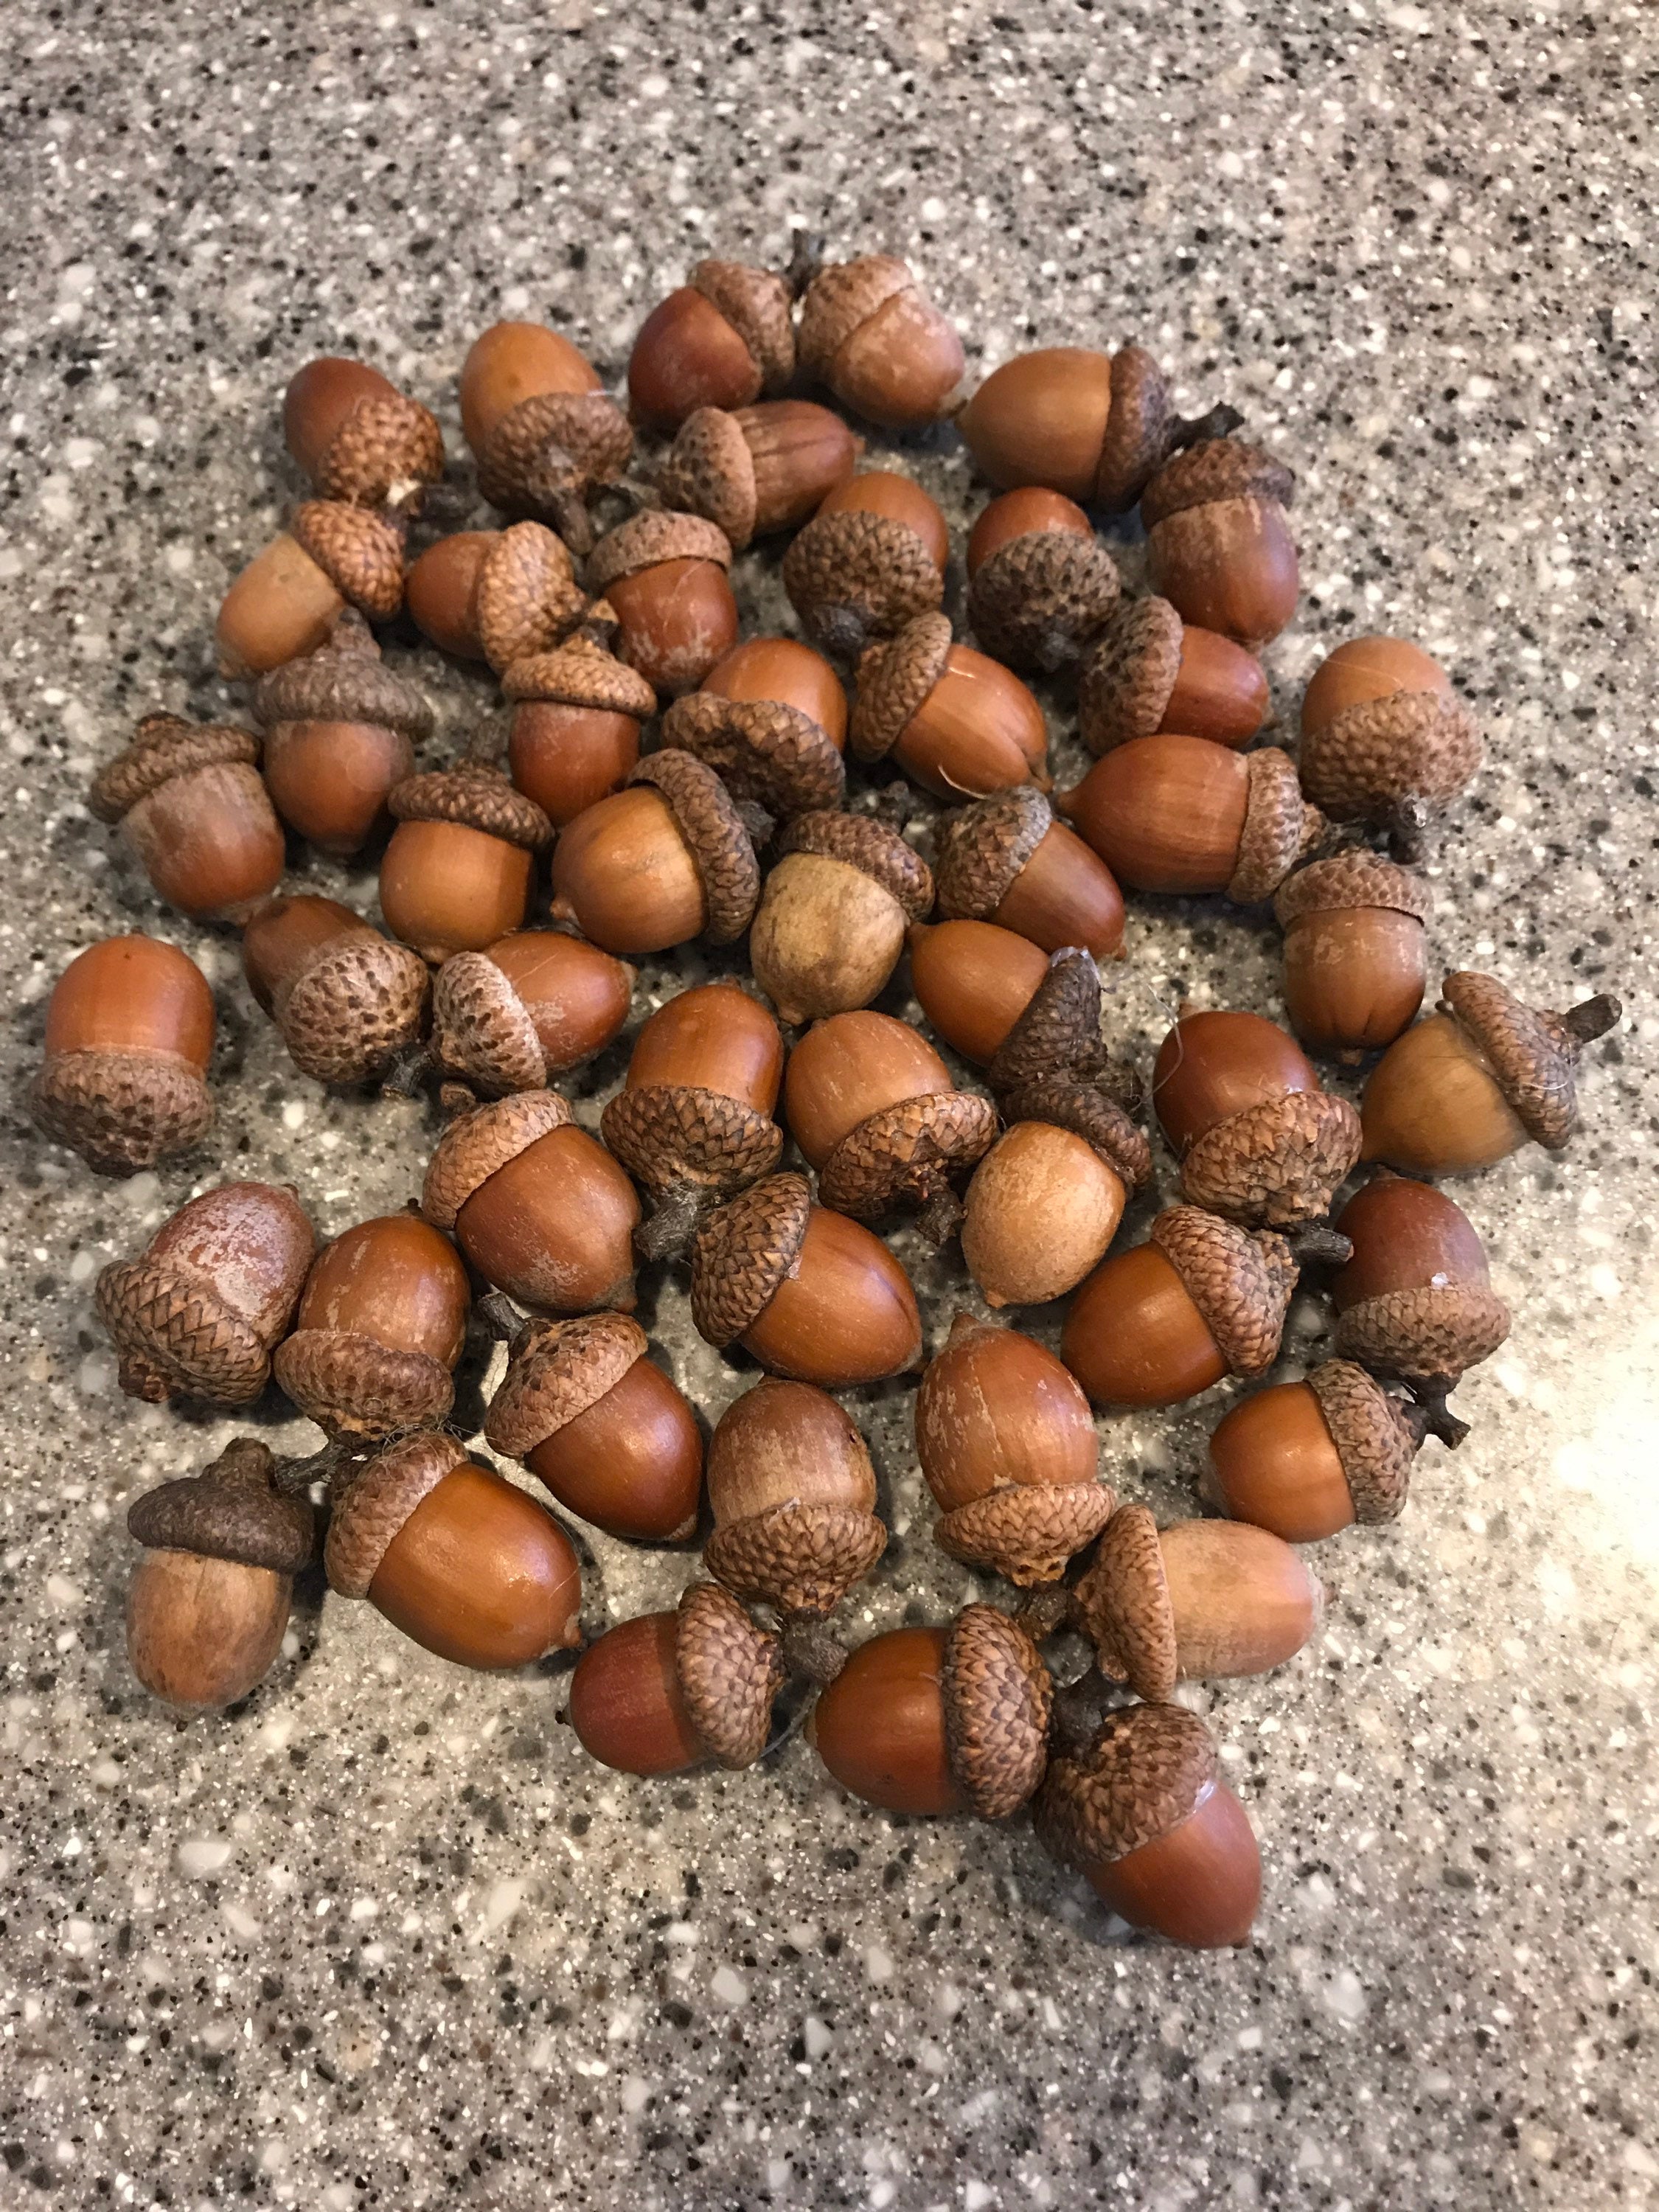 Acorns With Caps, Red Oak, 25 Count, Large in Size